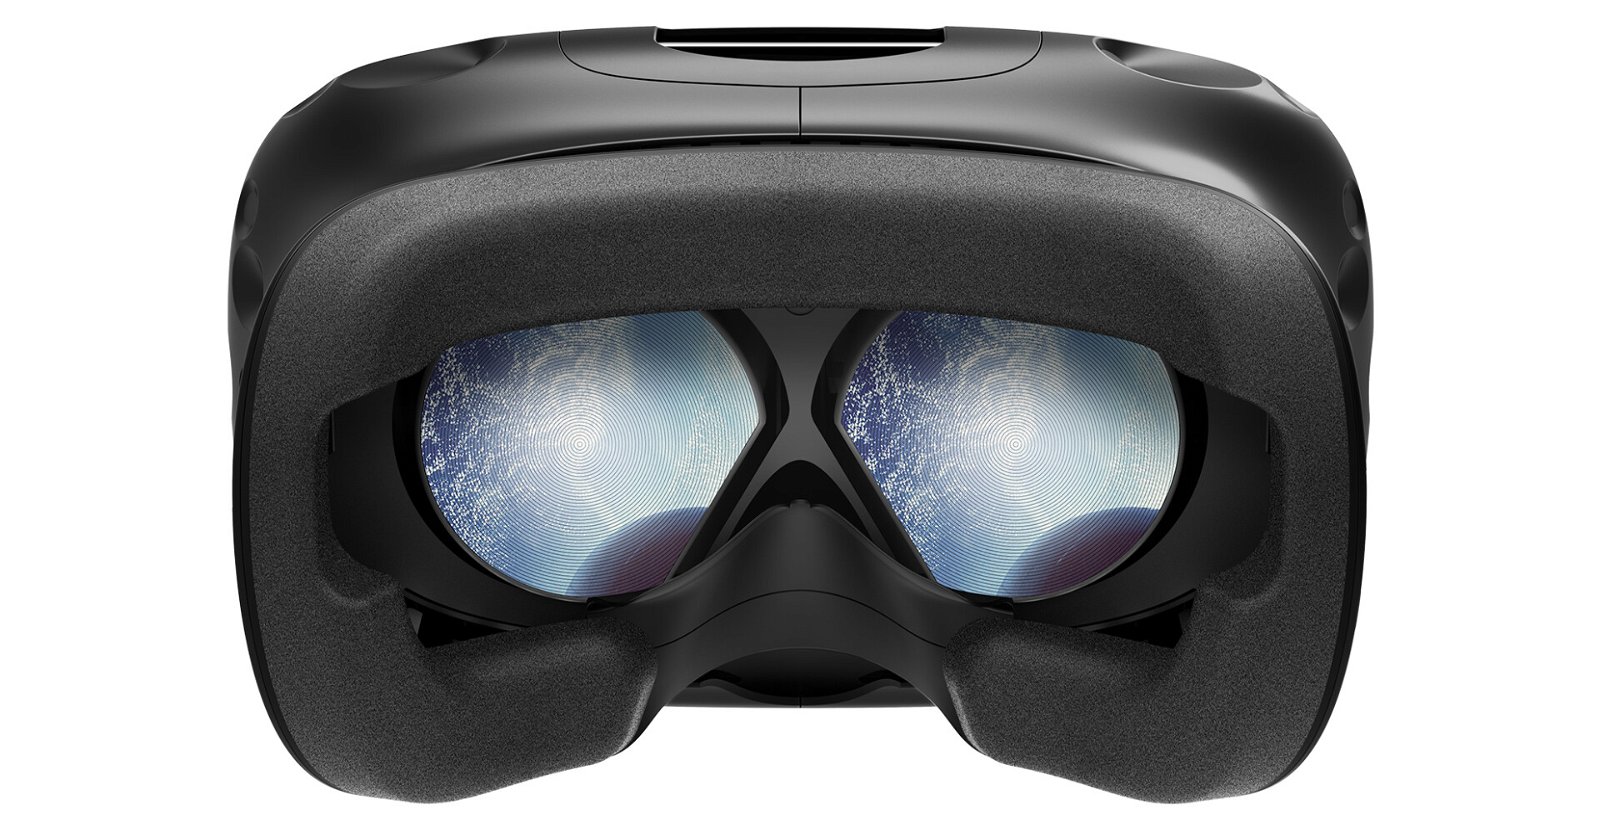 Hardware Review: Htc Vive 2